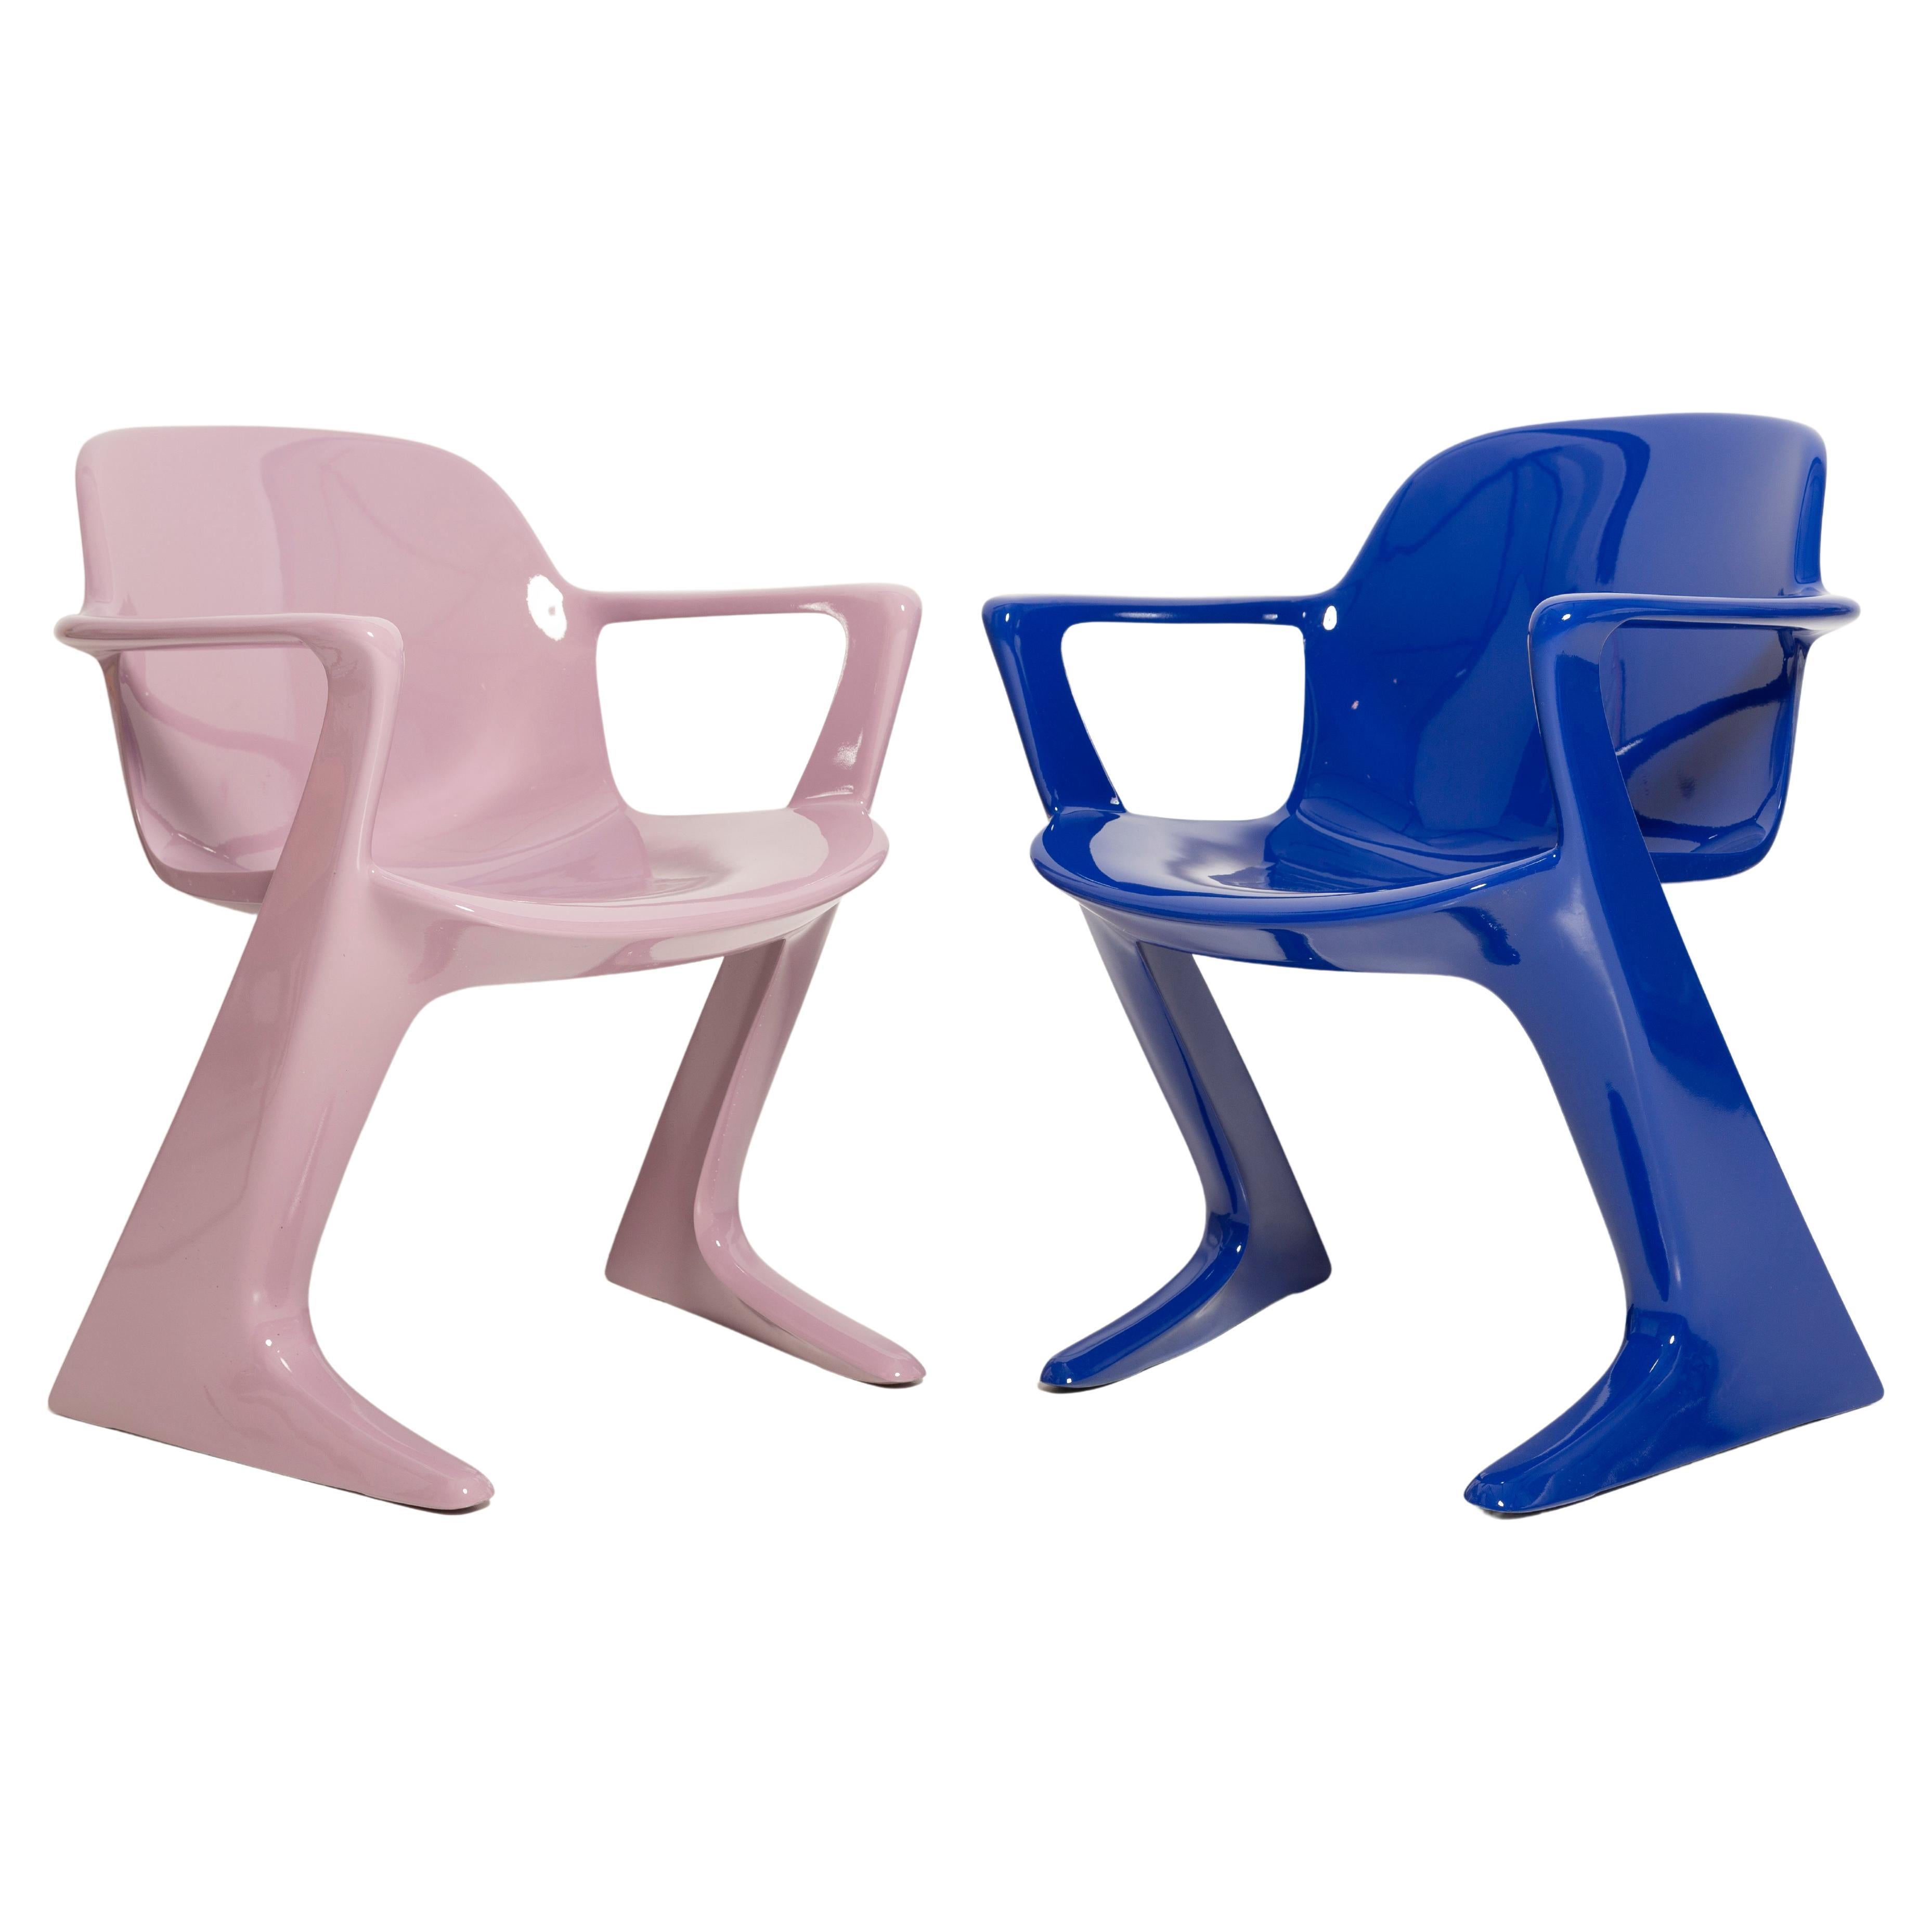 Two Mid-Century Lavender and Blue Kangaroo Chairs Ernst Moeckl, Germany, 1968 For Sale